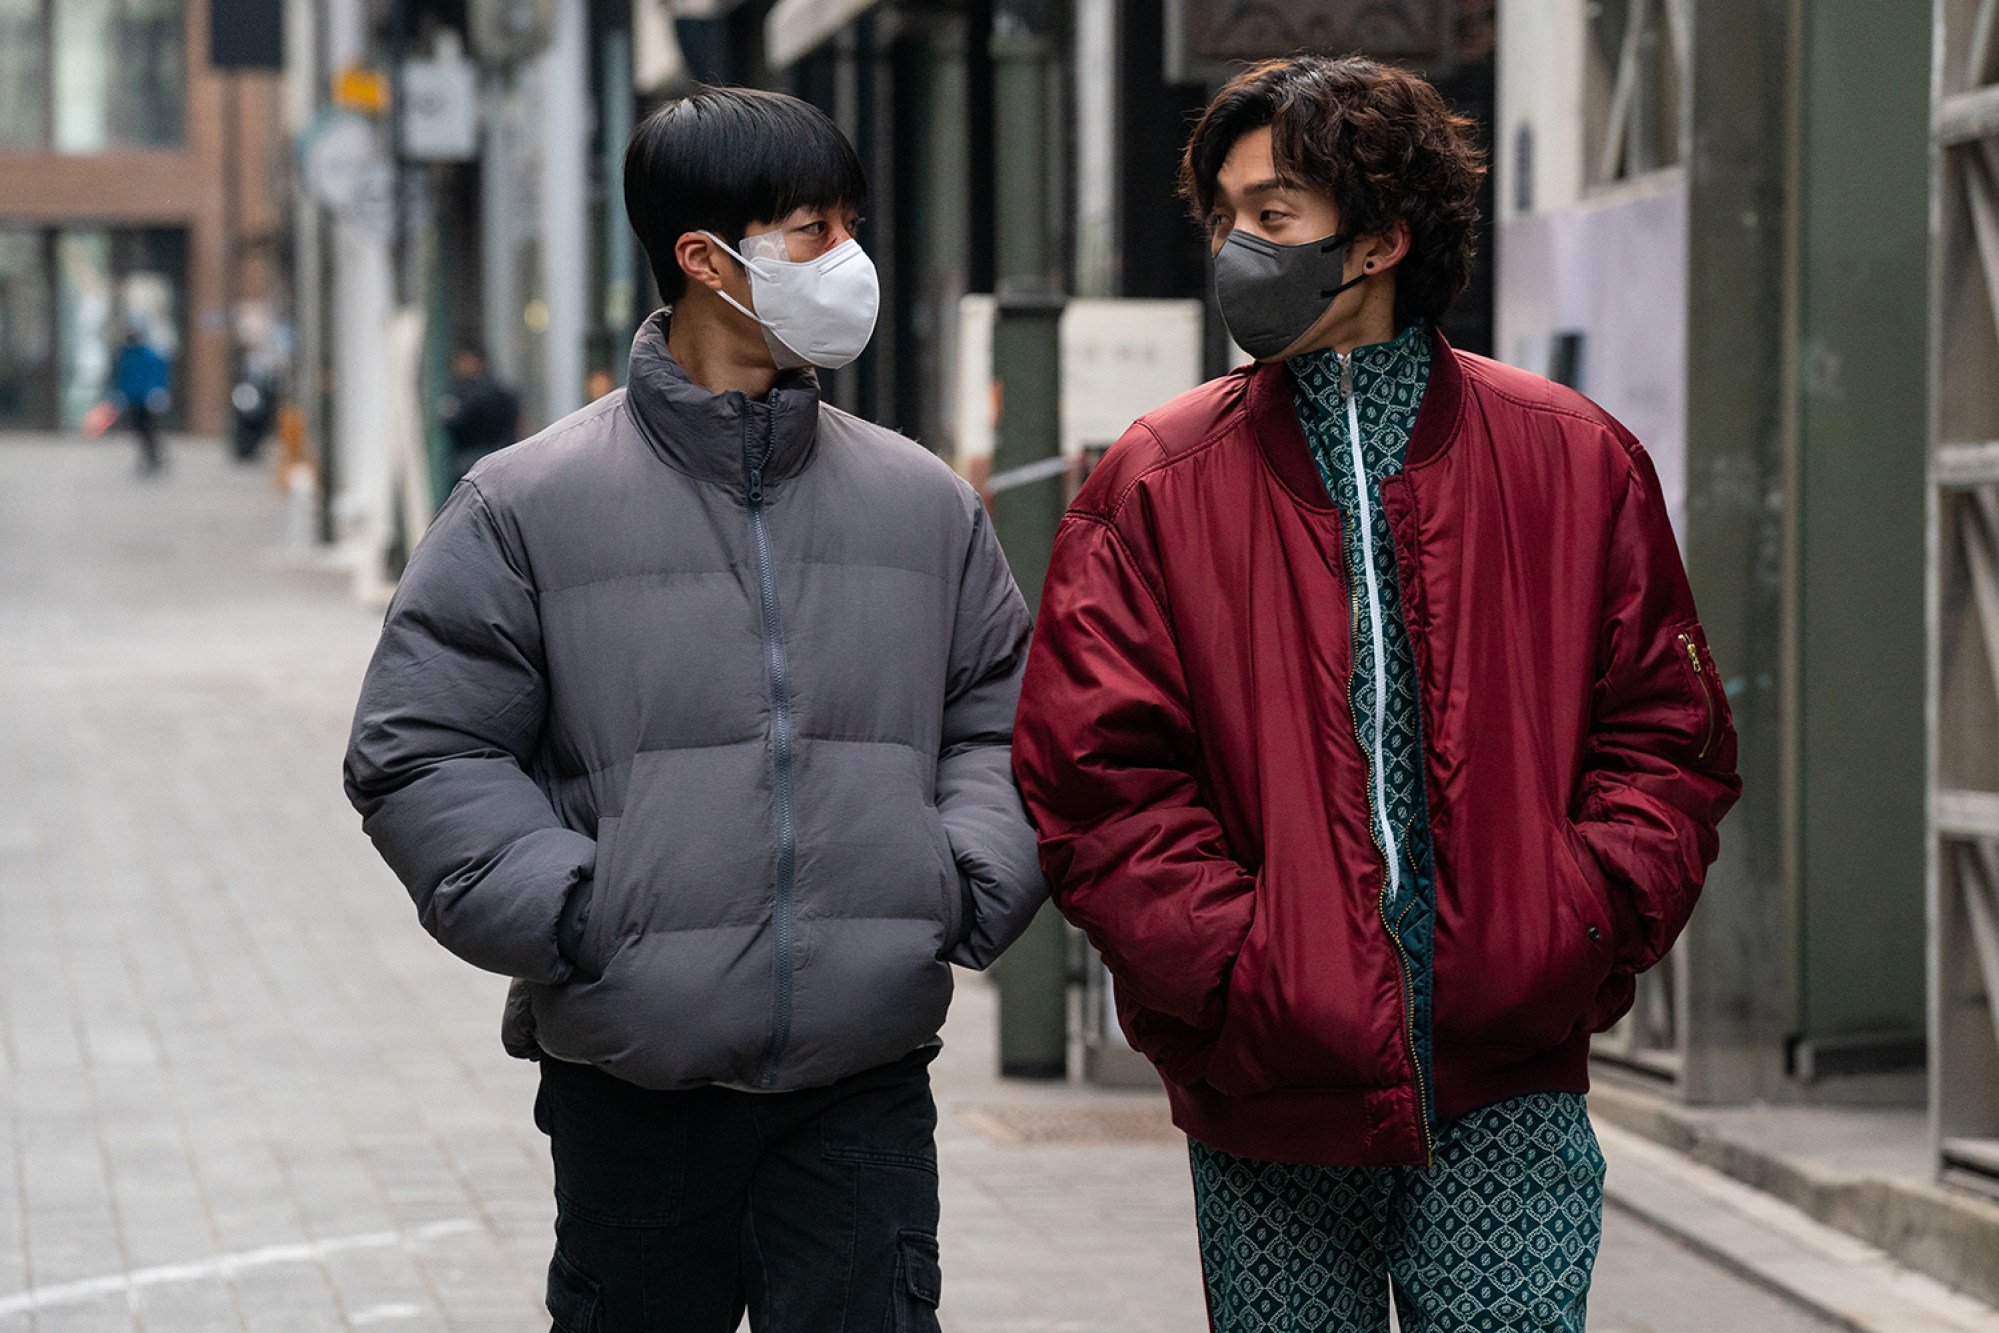 Woo Do-hwan (left) and Lee Sang-yi in a still from “Bloodhounds”. Photo: Netflix